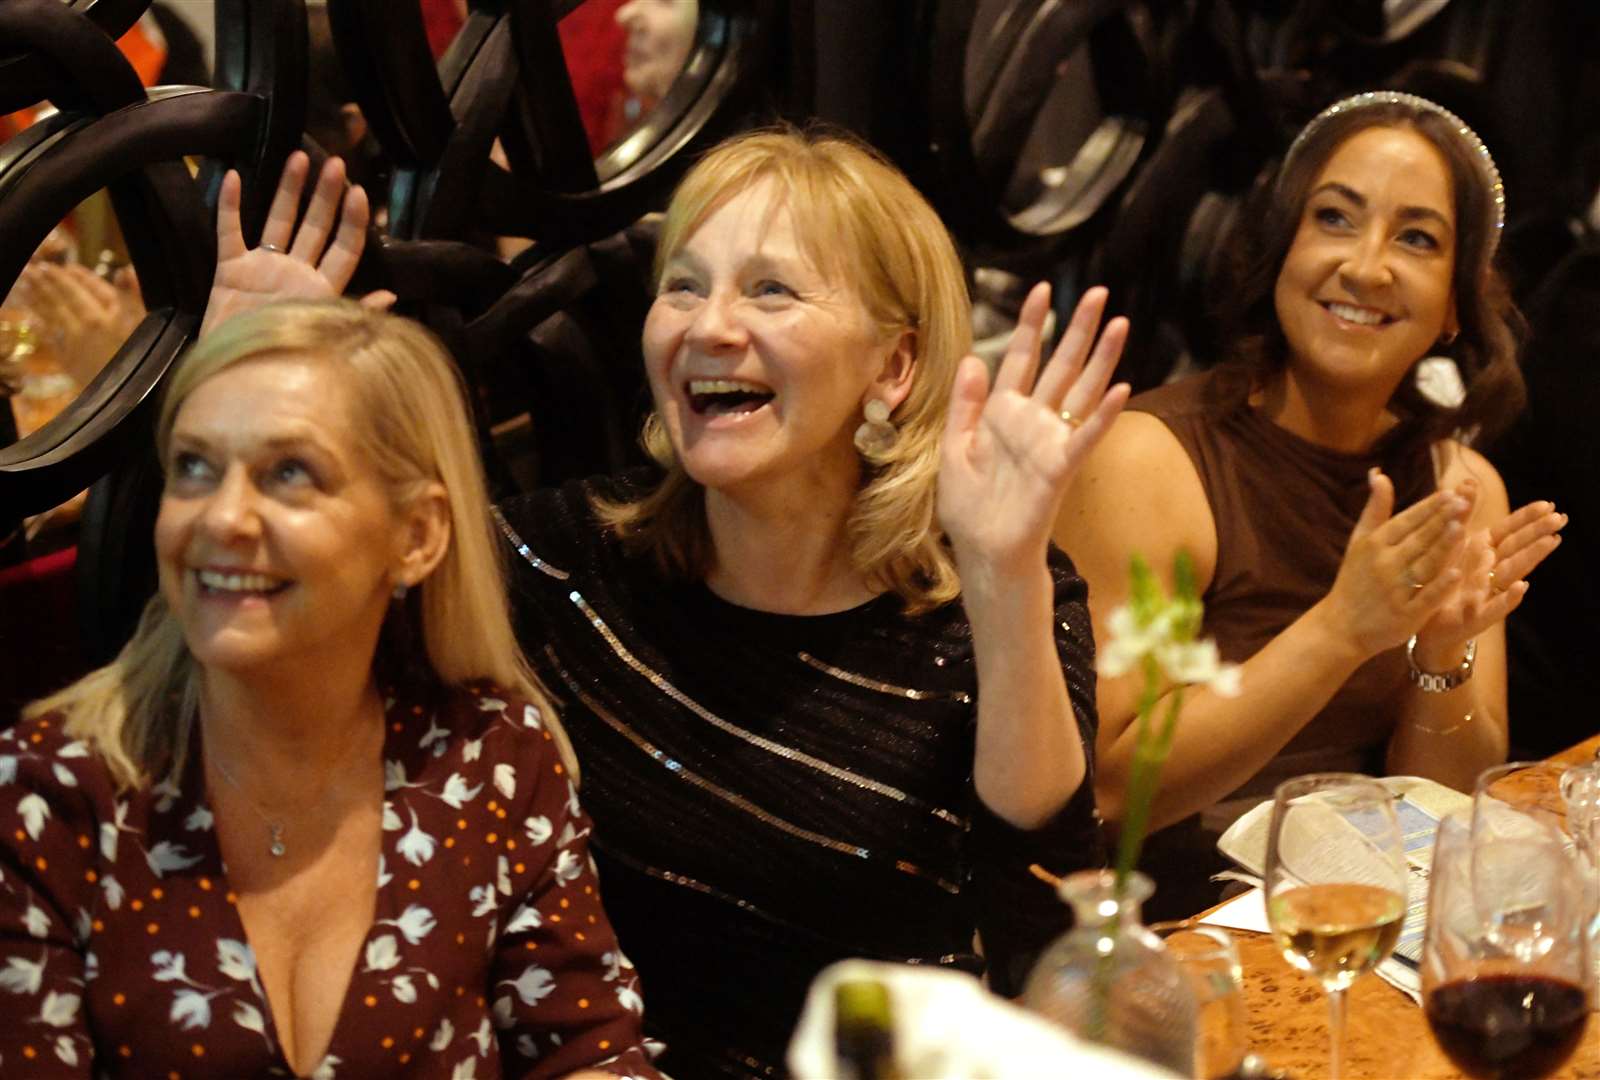 Sheila Macdonald, Avril Paton-Mackenzie and Milly Macdonald cheer on their favourites at the Cafe 1 fundraiser to mark Cheltenham Festival race week.